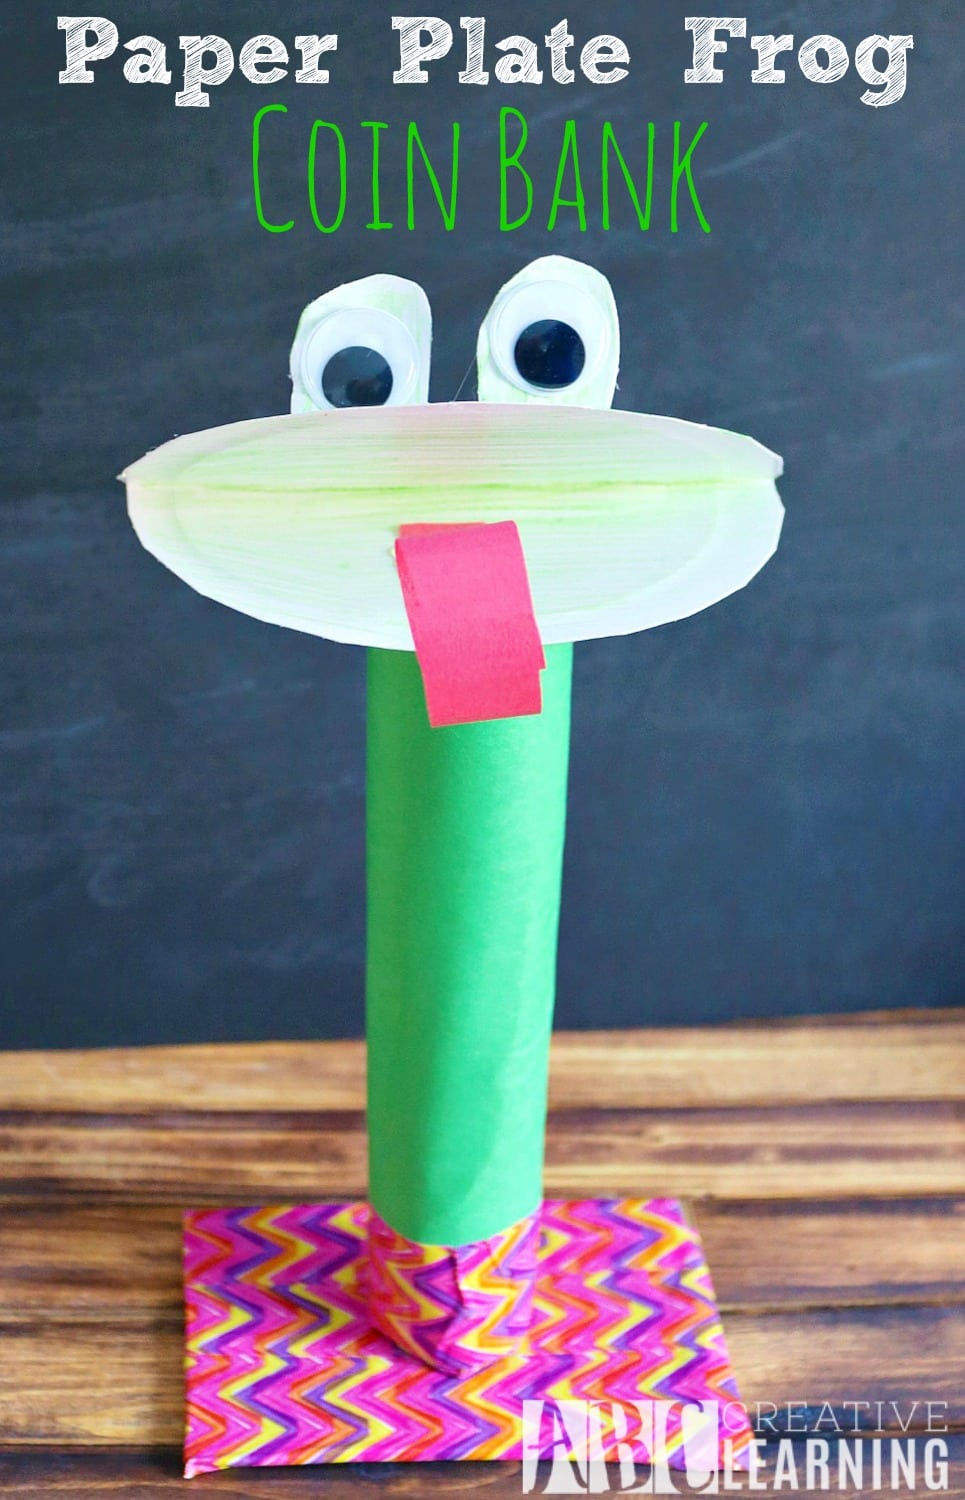 Paper Plate Frog Coin Bank